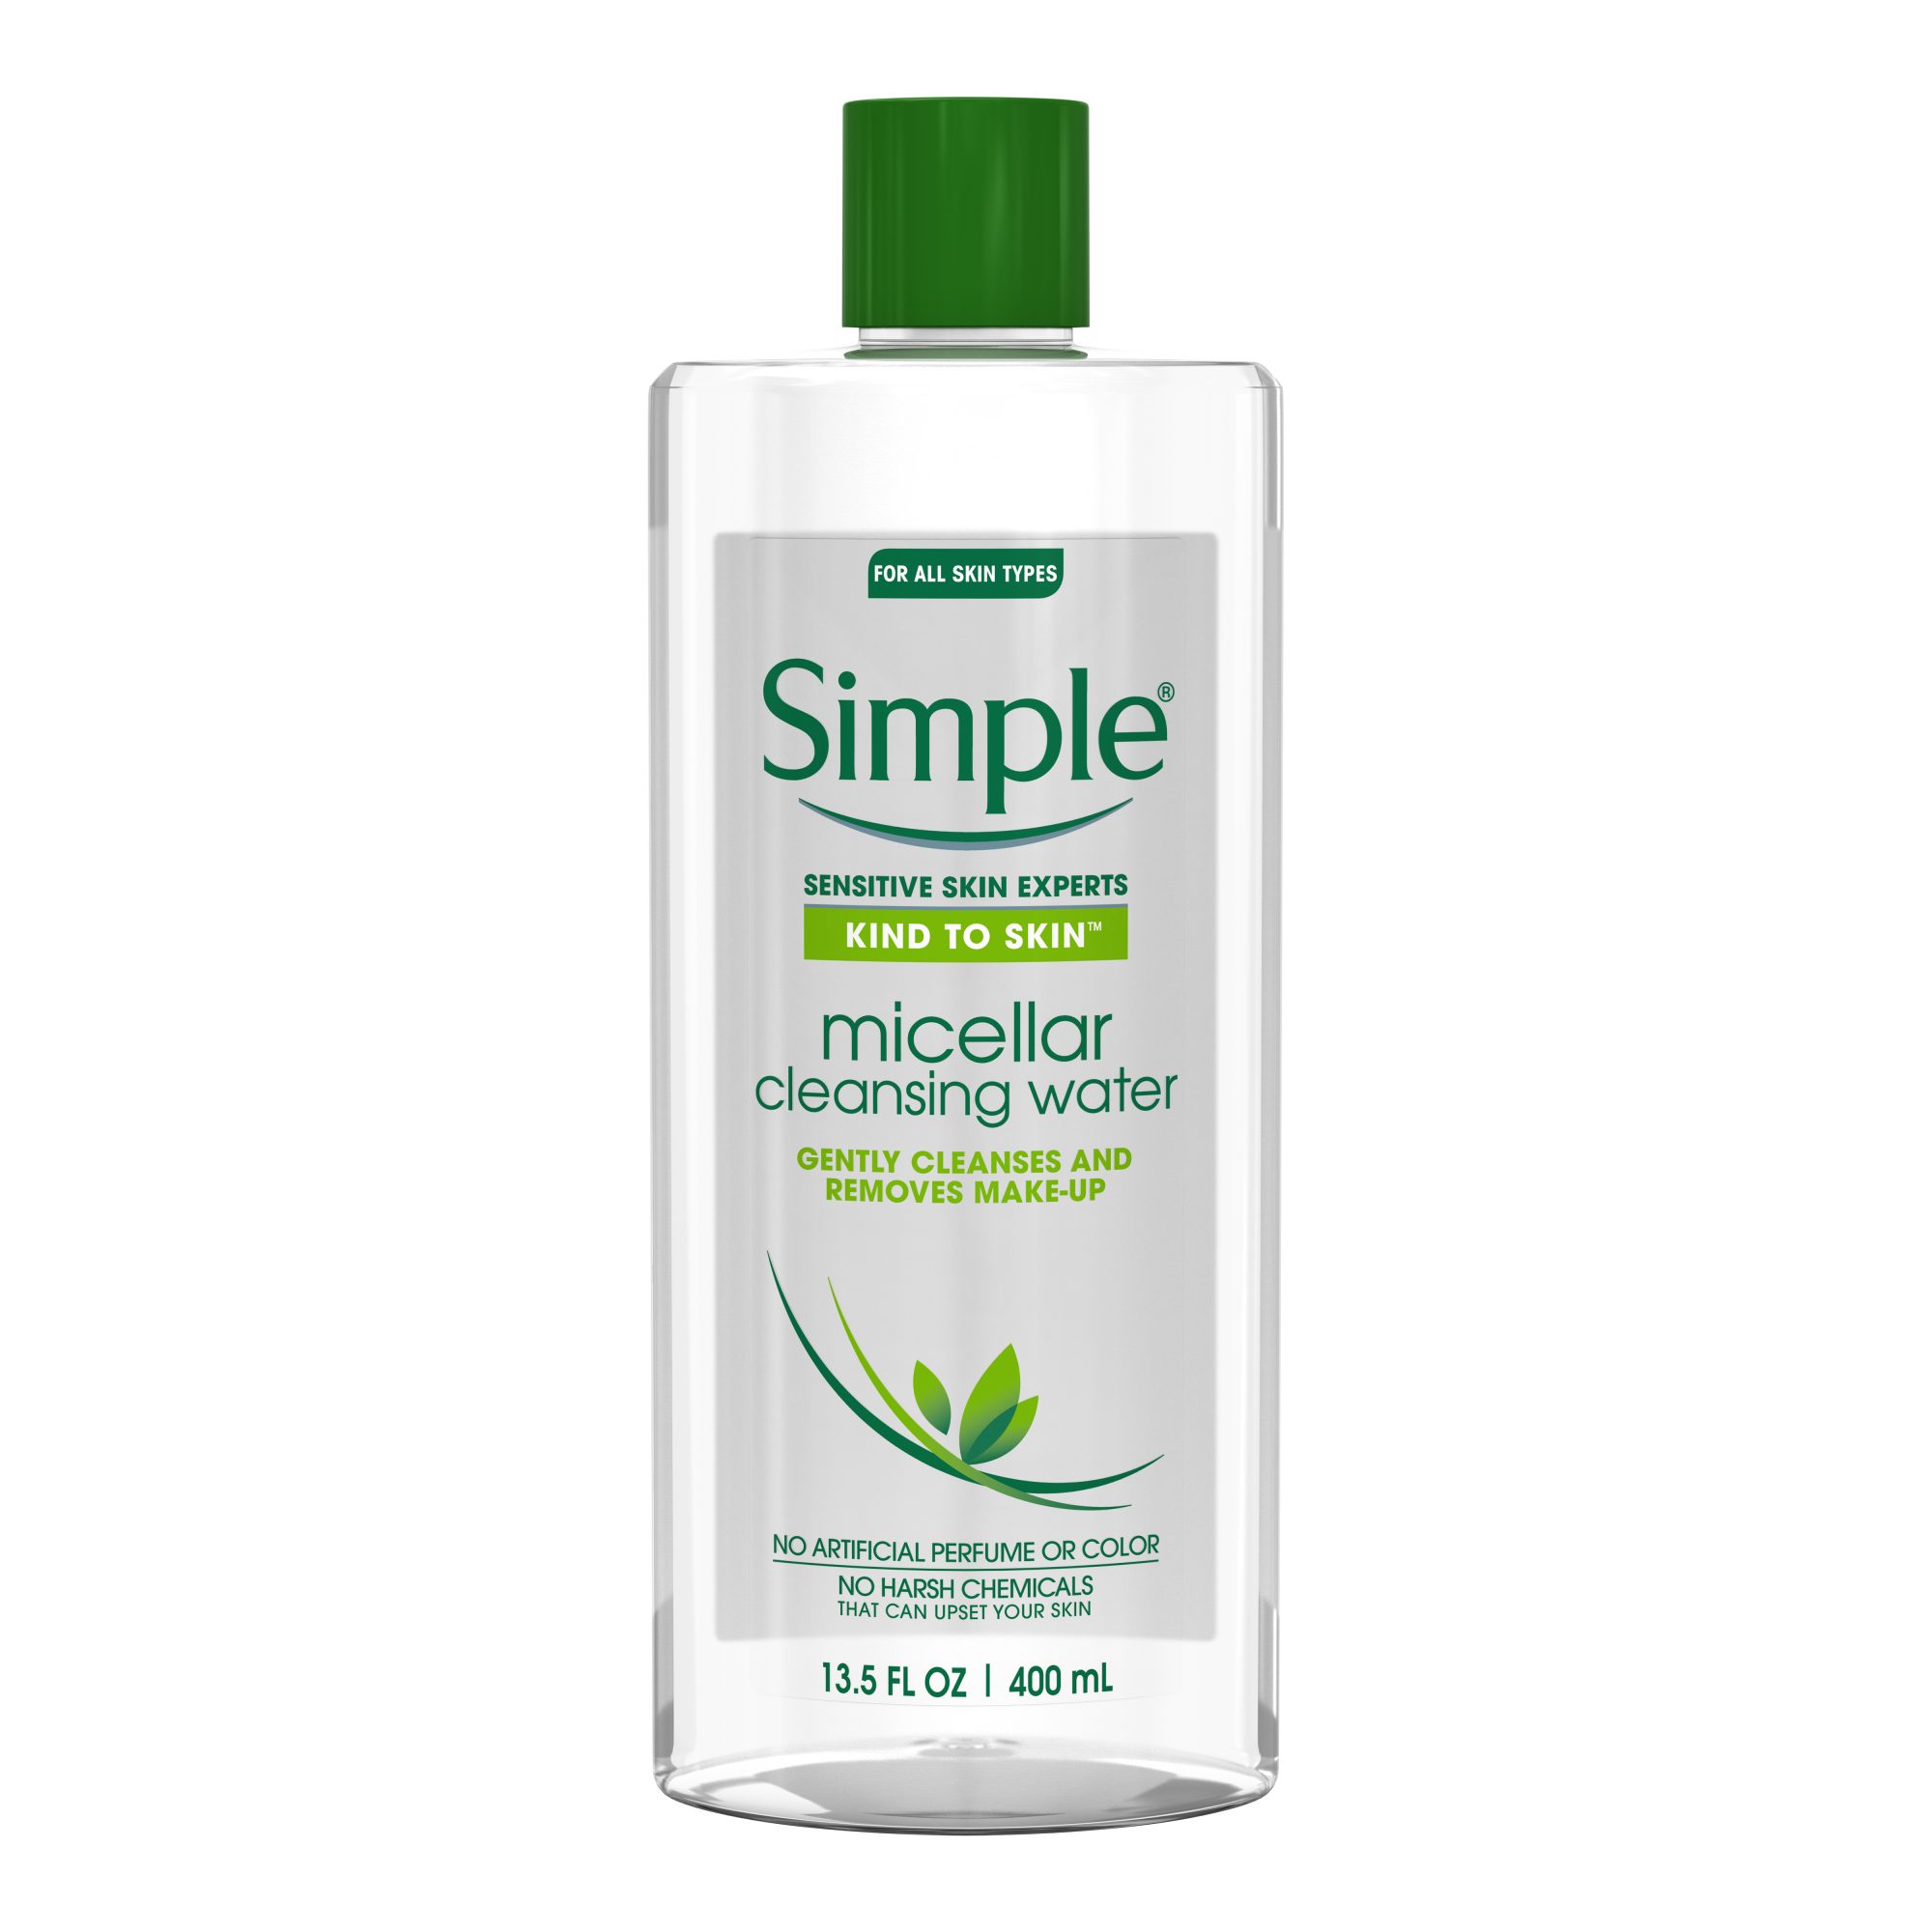 Simple-Kind-to-Skin-Micellar-Cleansing-Water